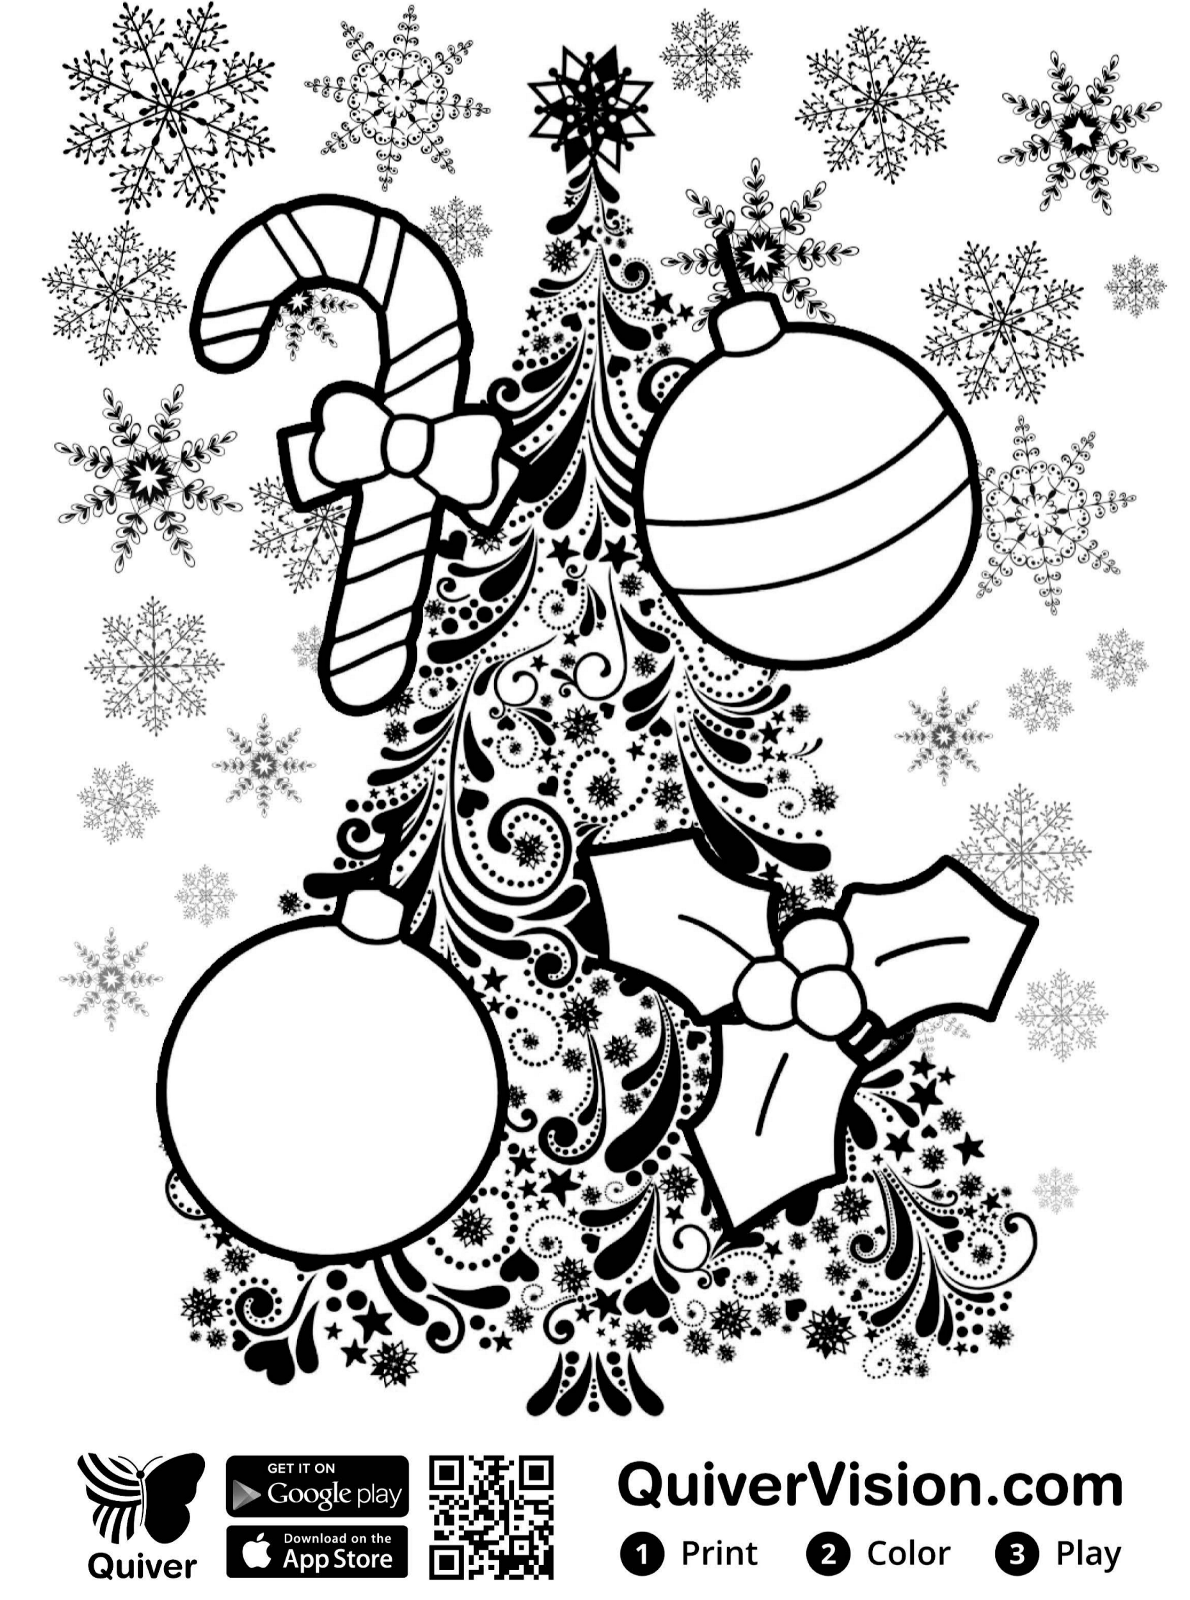 Kids n fun.com   Coloring page Quiver Christmas